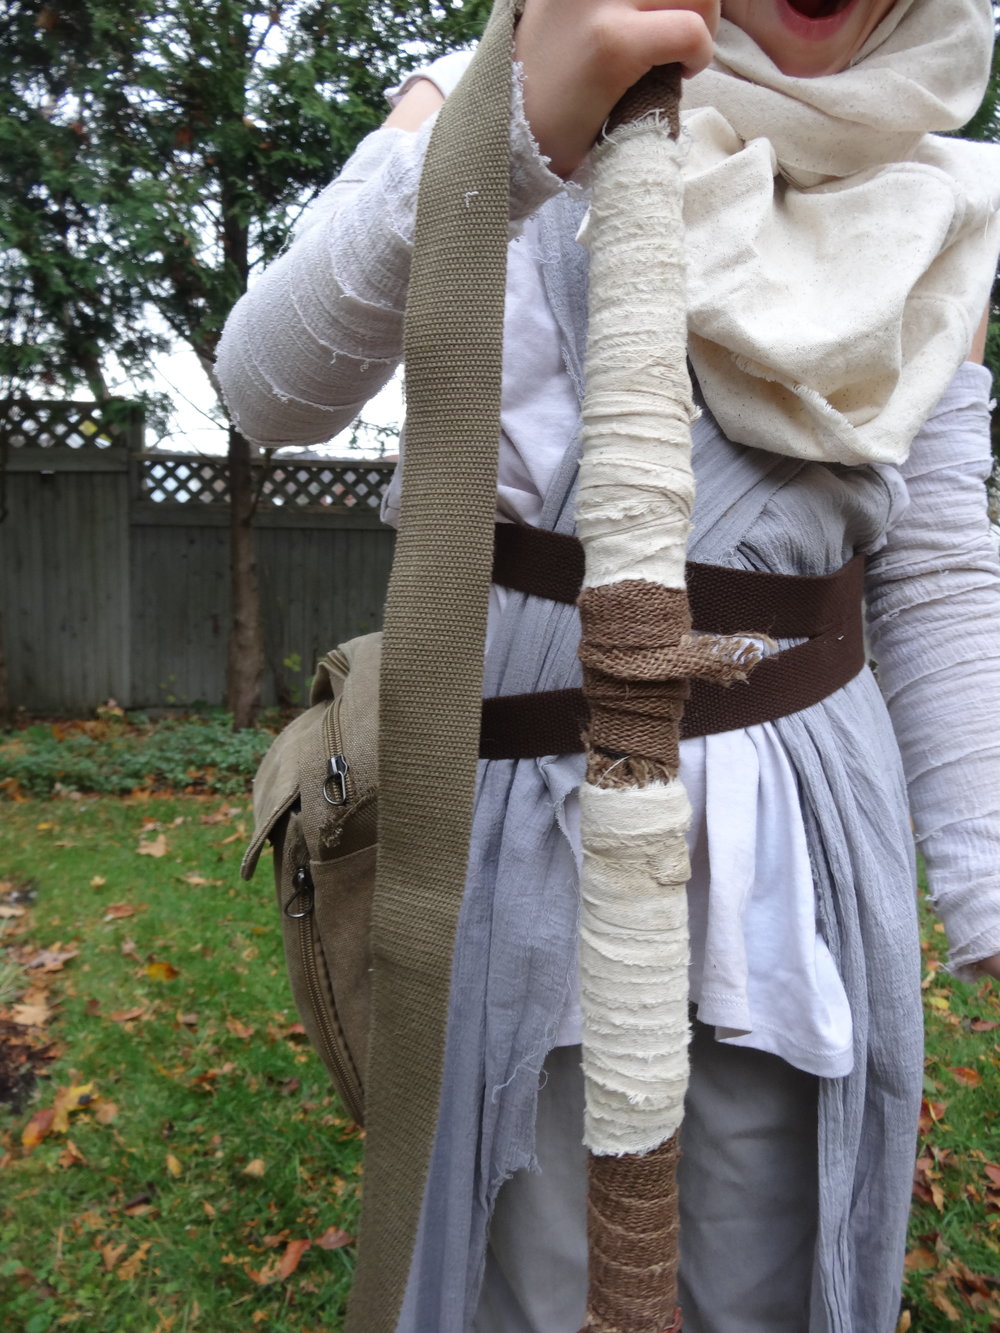  Staff: Curtain rod, spray painted and wrapped in gauze and burlap with a handle from the bag on her belt.  Belt: Belt webbing sewn together on the left and clipped together under the bag on the right. 